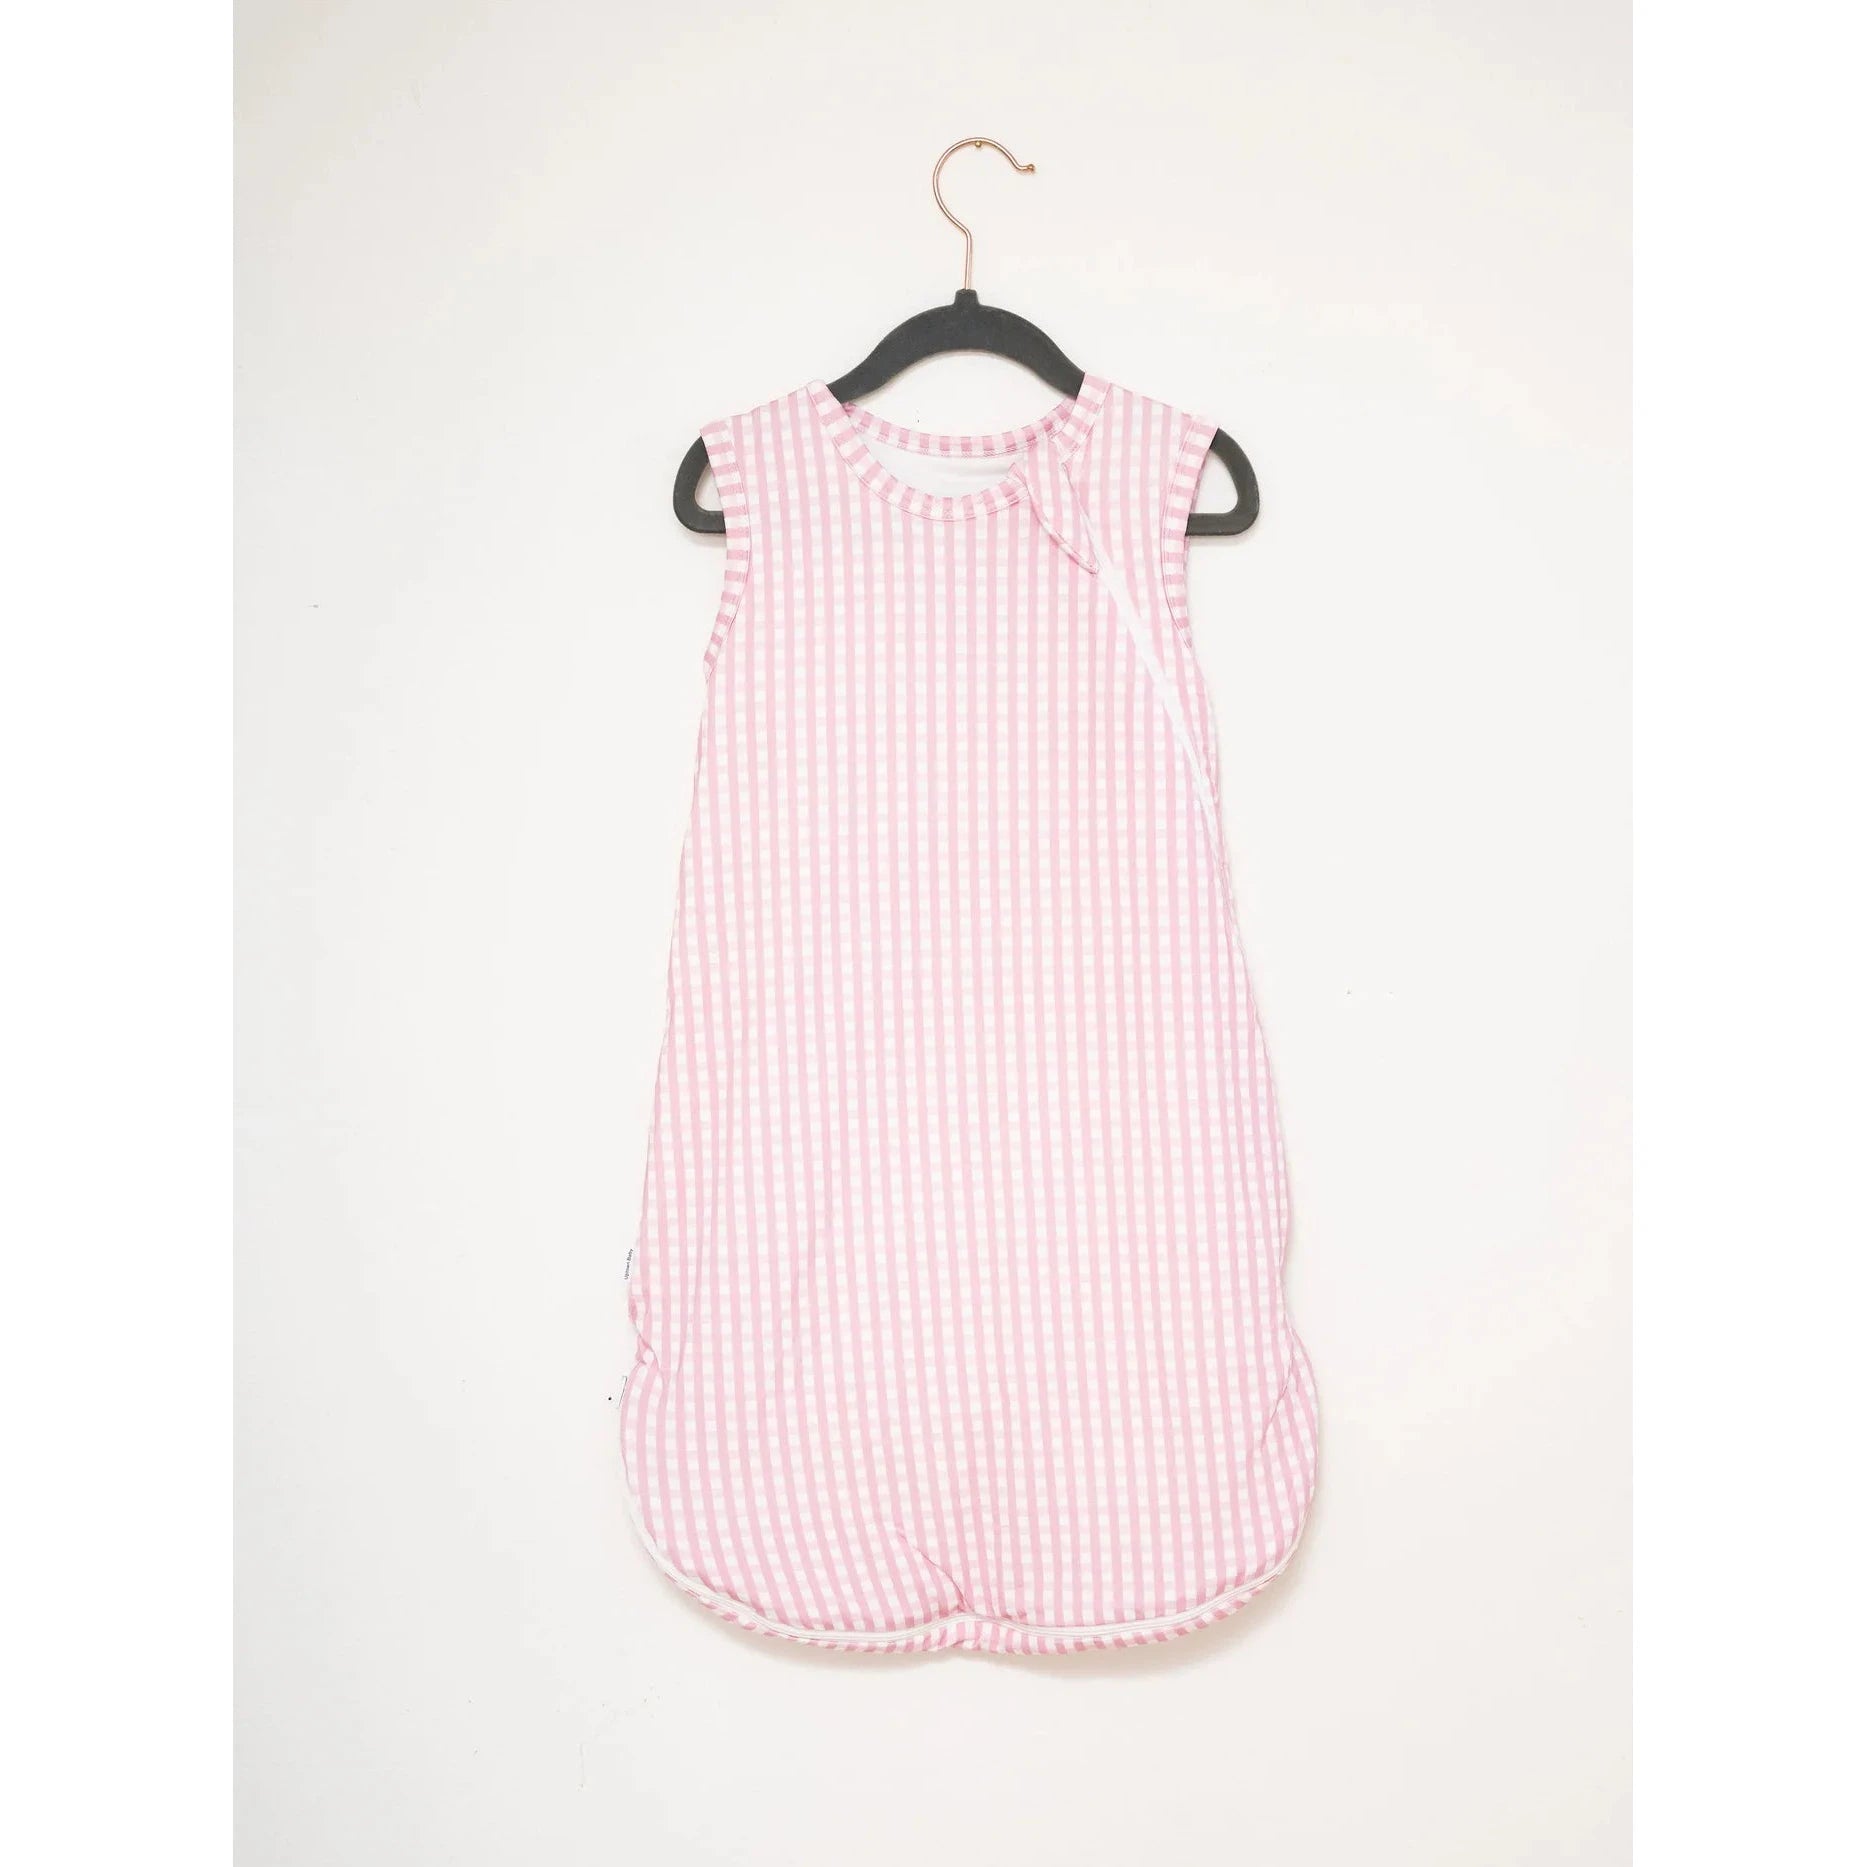 The Uptown Baby A+ Sleep Bag - Pink Gingham-The Uptown Baby-Little Giant Kidz